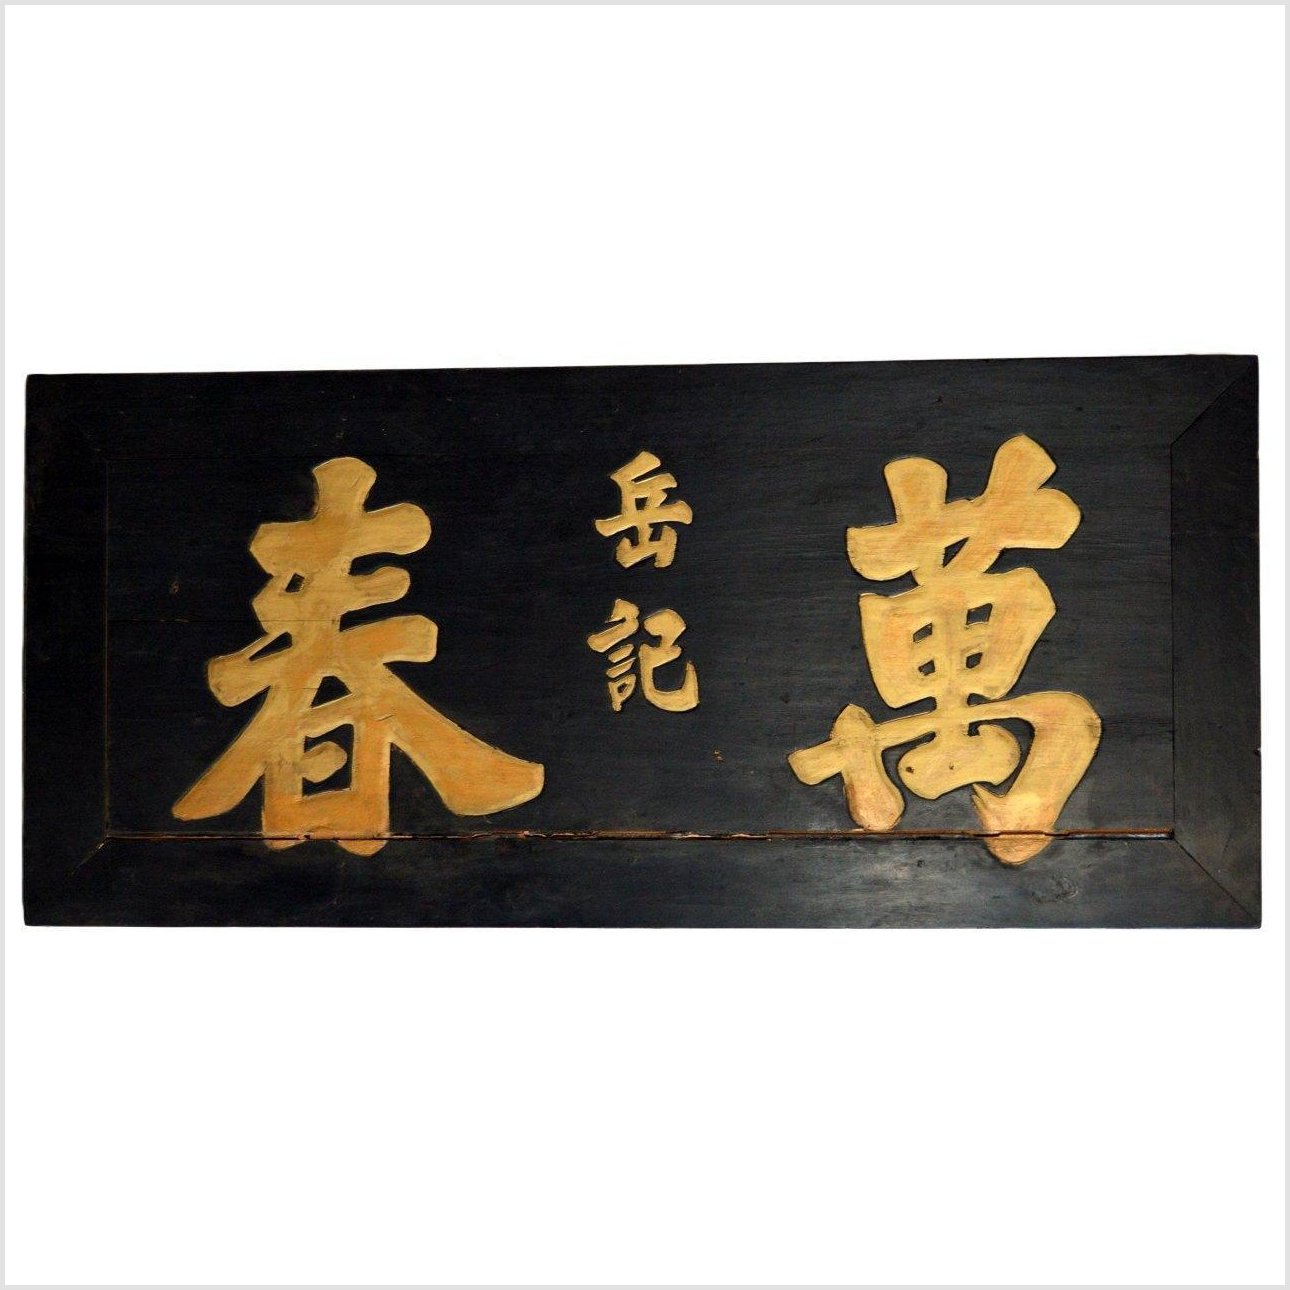 Antique Calligraphy Signage-YN2960-4. Asian & Chinese Furniture, Art, Antiques, Vintage Home Décor for sale at FEA Home